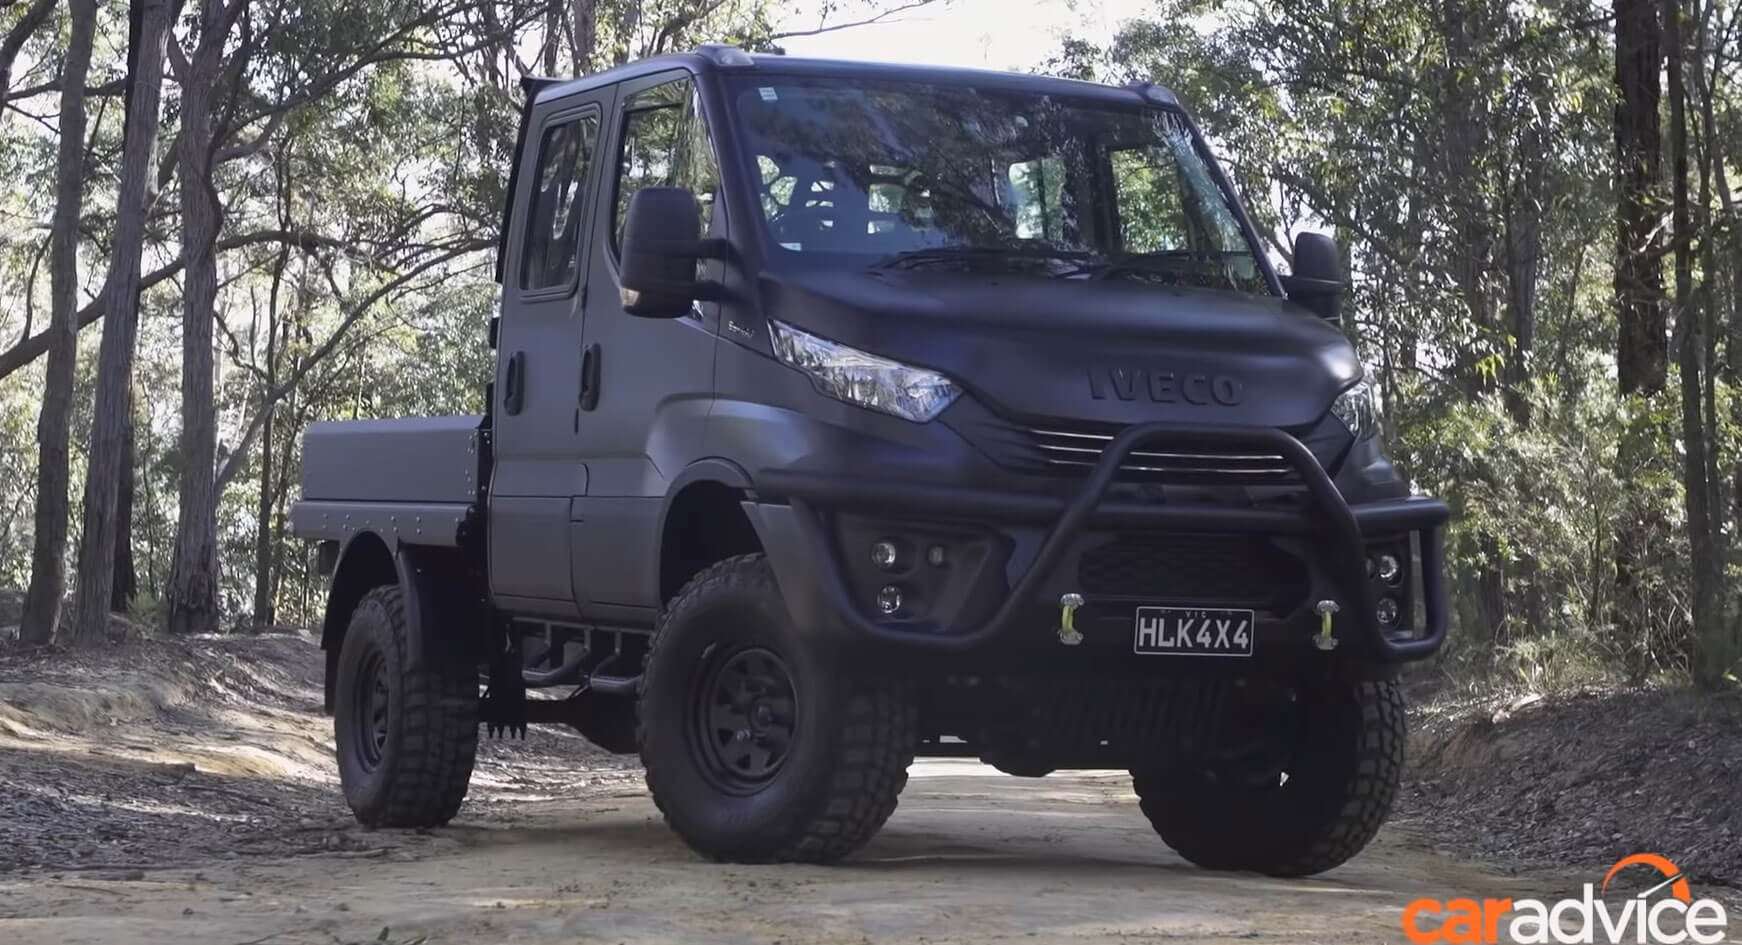 https://www.carscoops.com/wp-content/uploads/2019/09/49bc0e0c-2019-iveco-daily-4x4.jpg